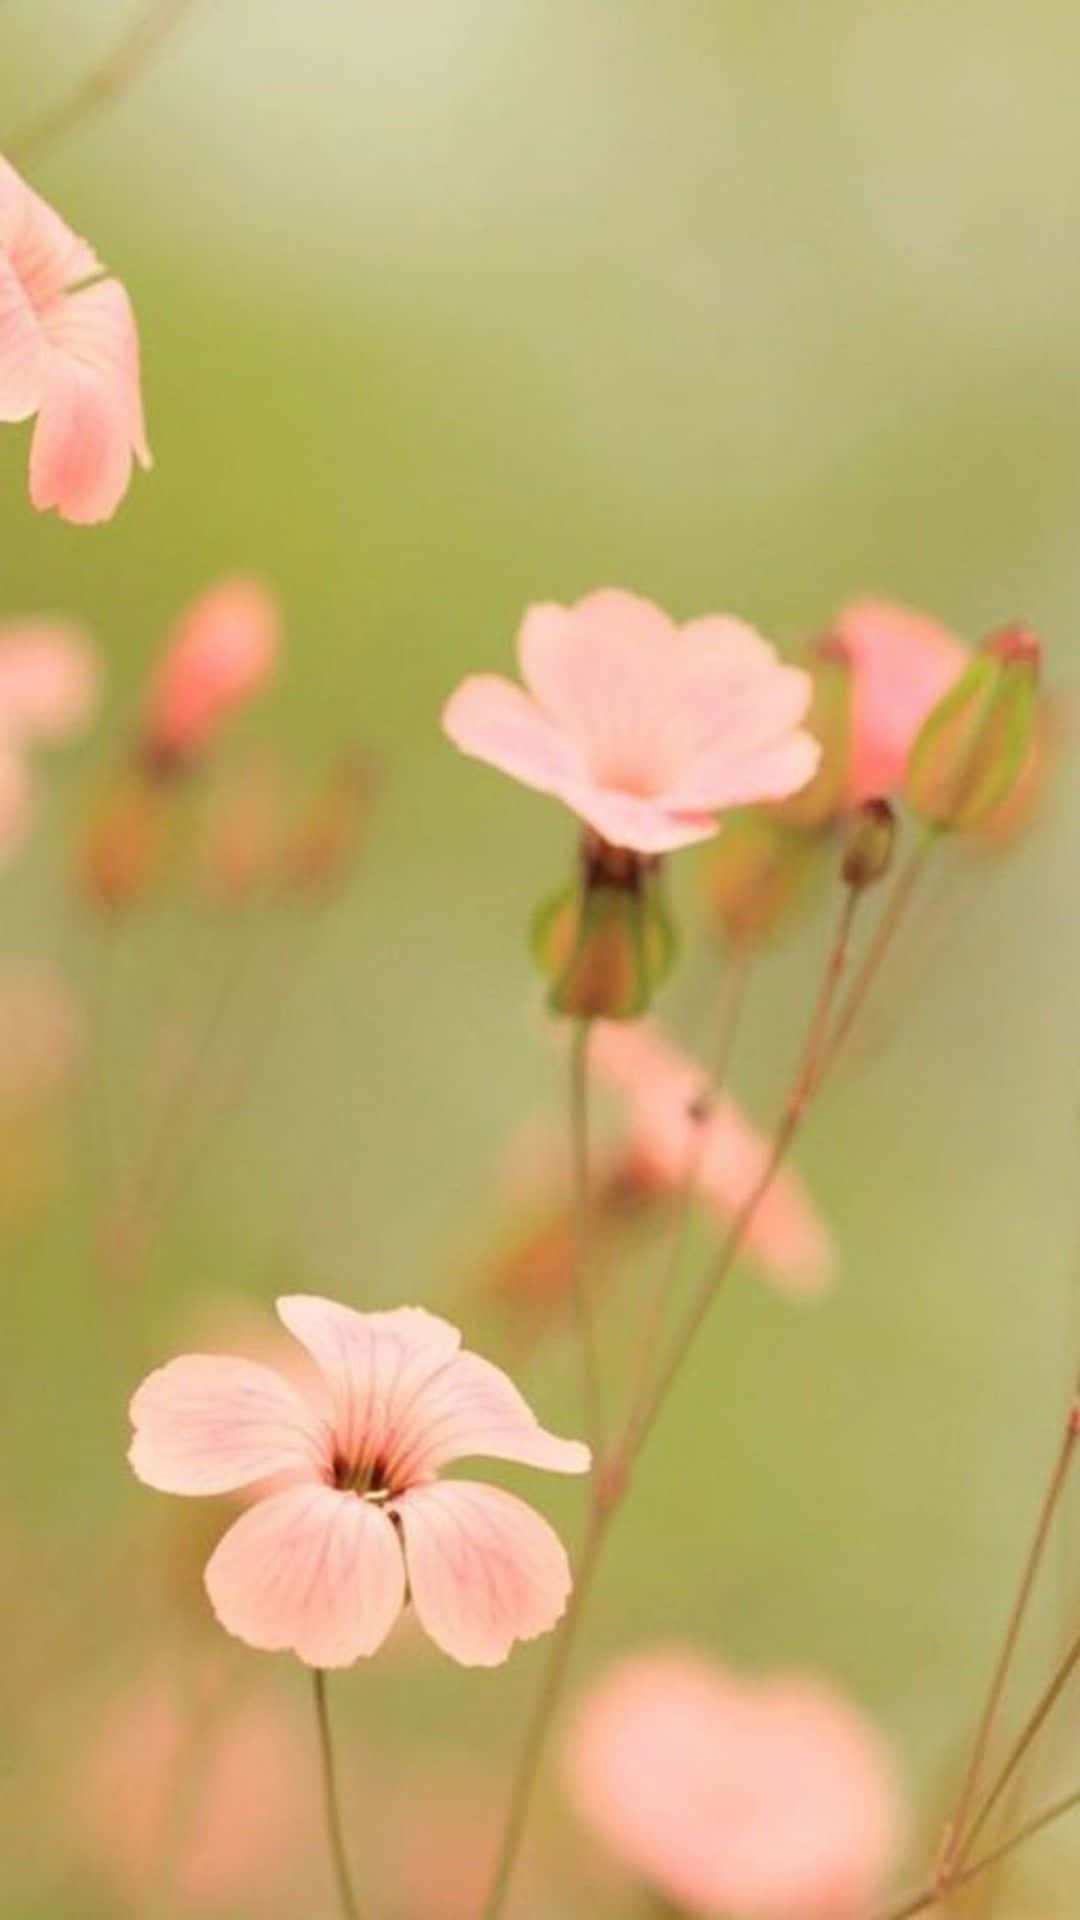 "Beautiful flower wallpapers to customize your Iphone"